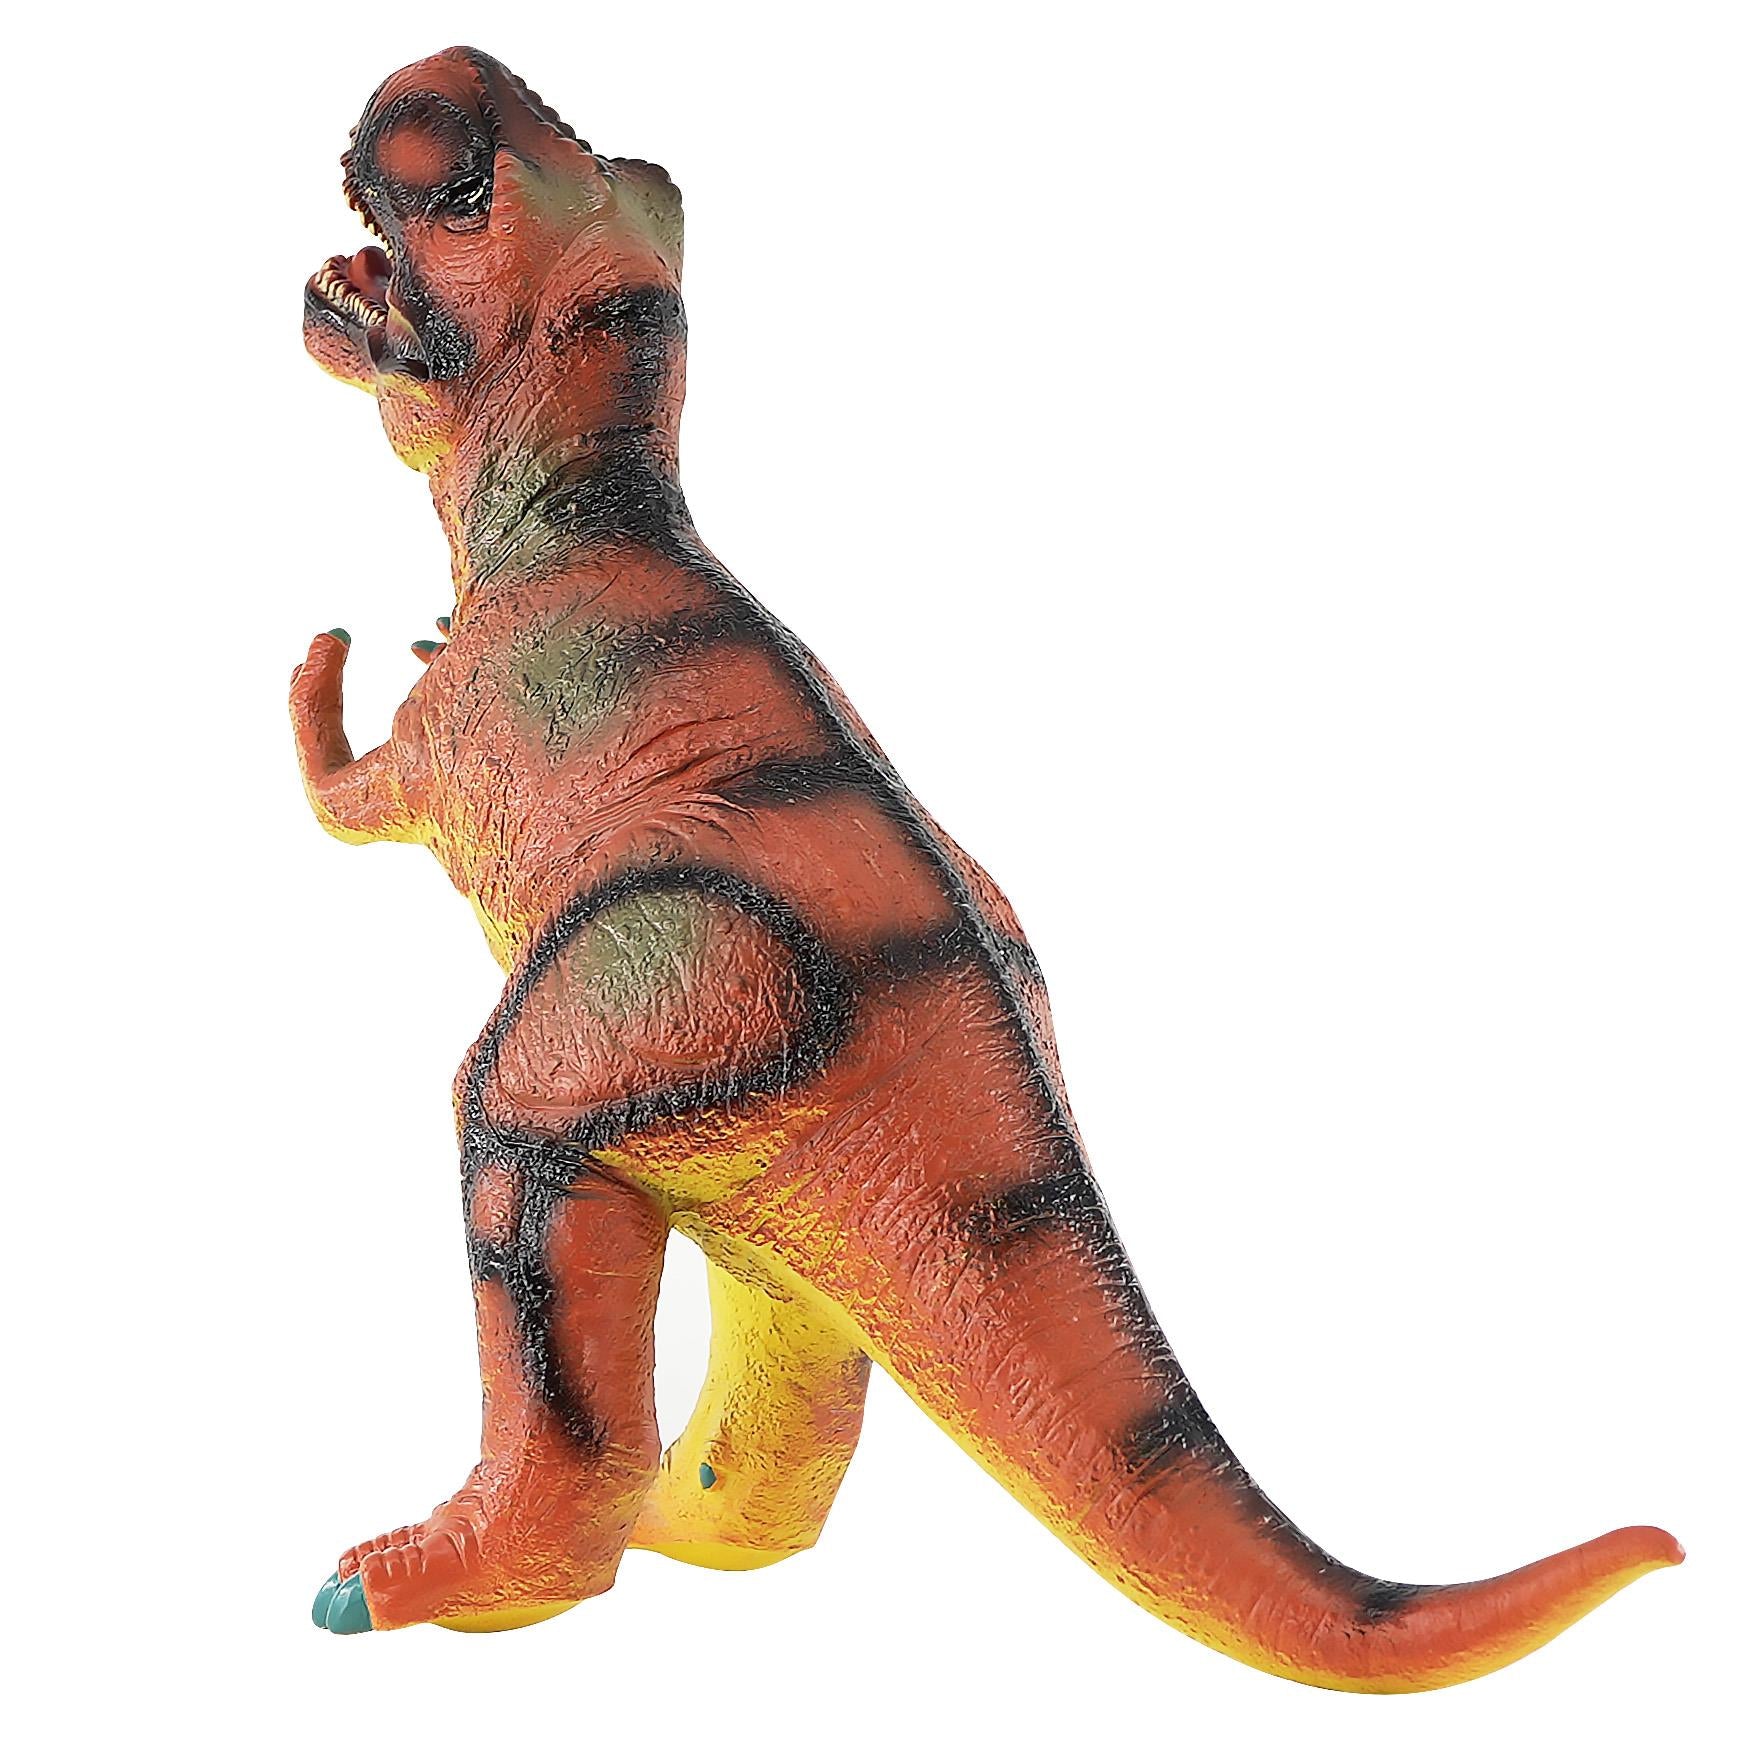 T-Rex Stuffed Toy Action Play Figure by The Magic Toy Shop - UKBuyZone